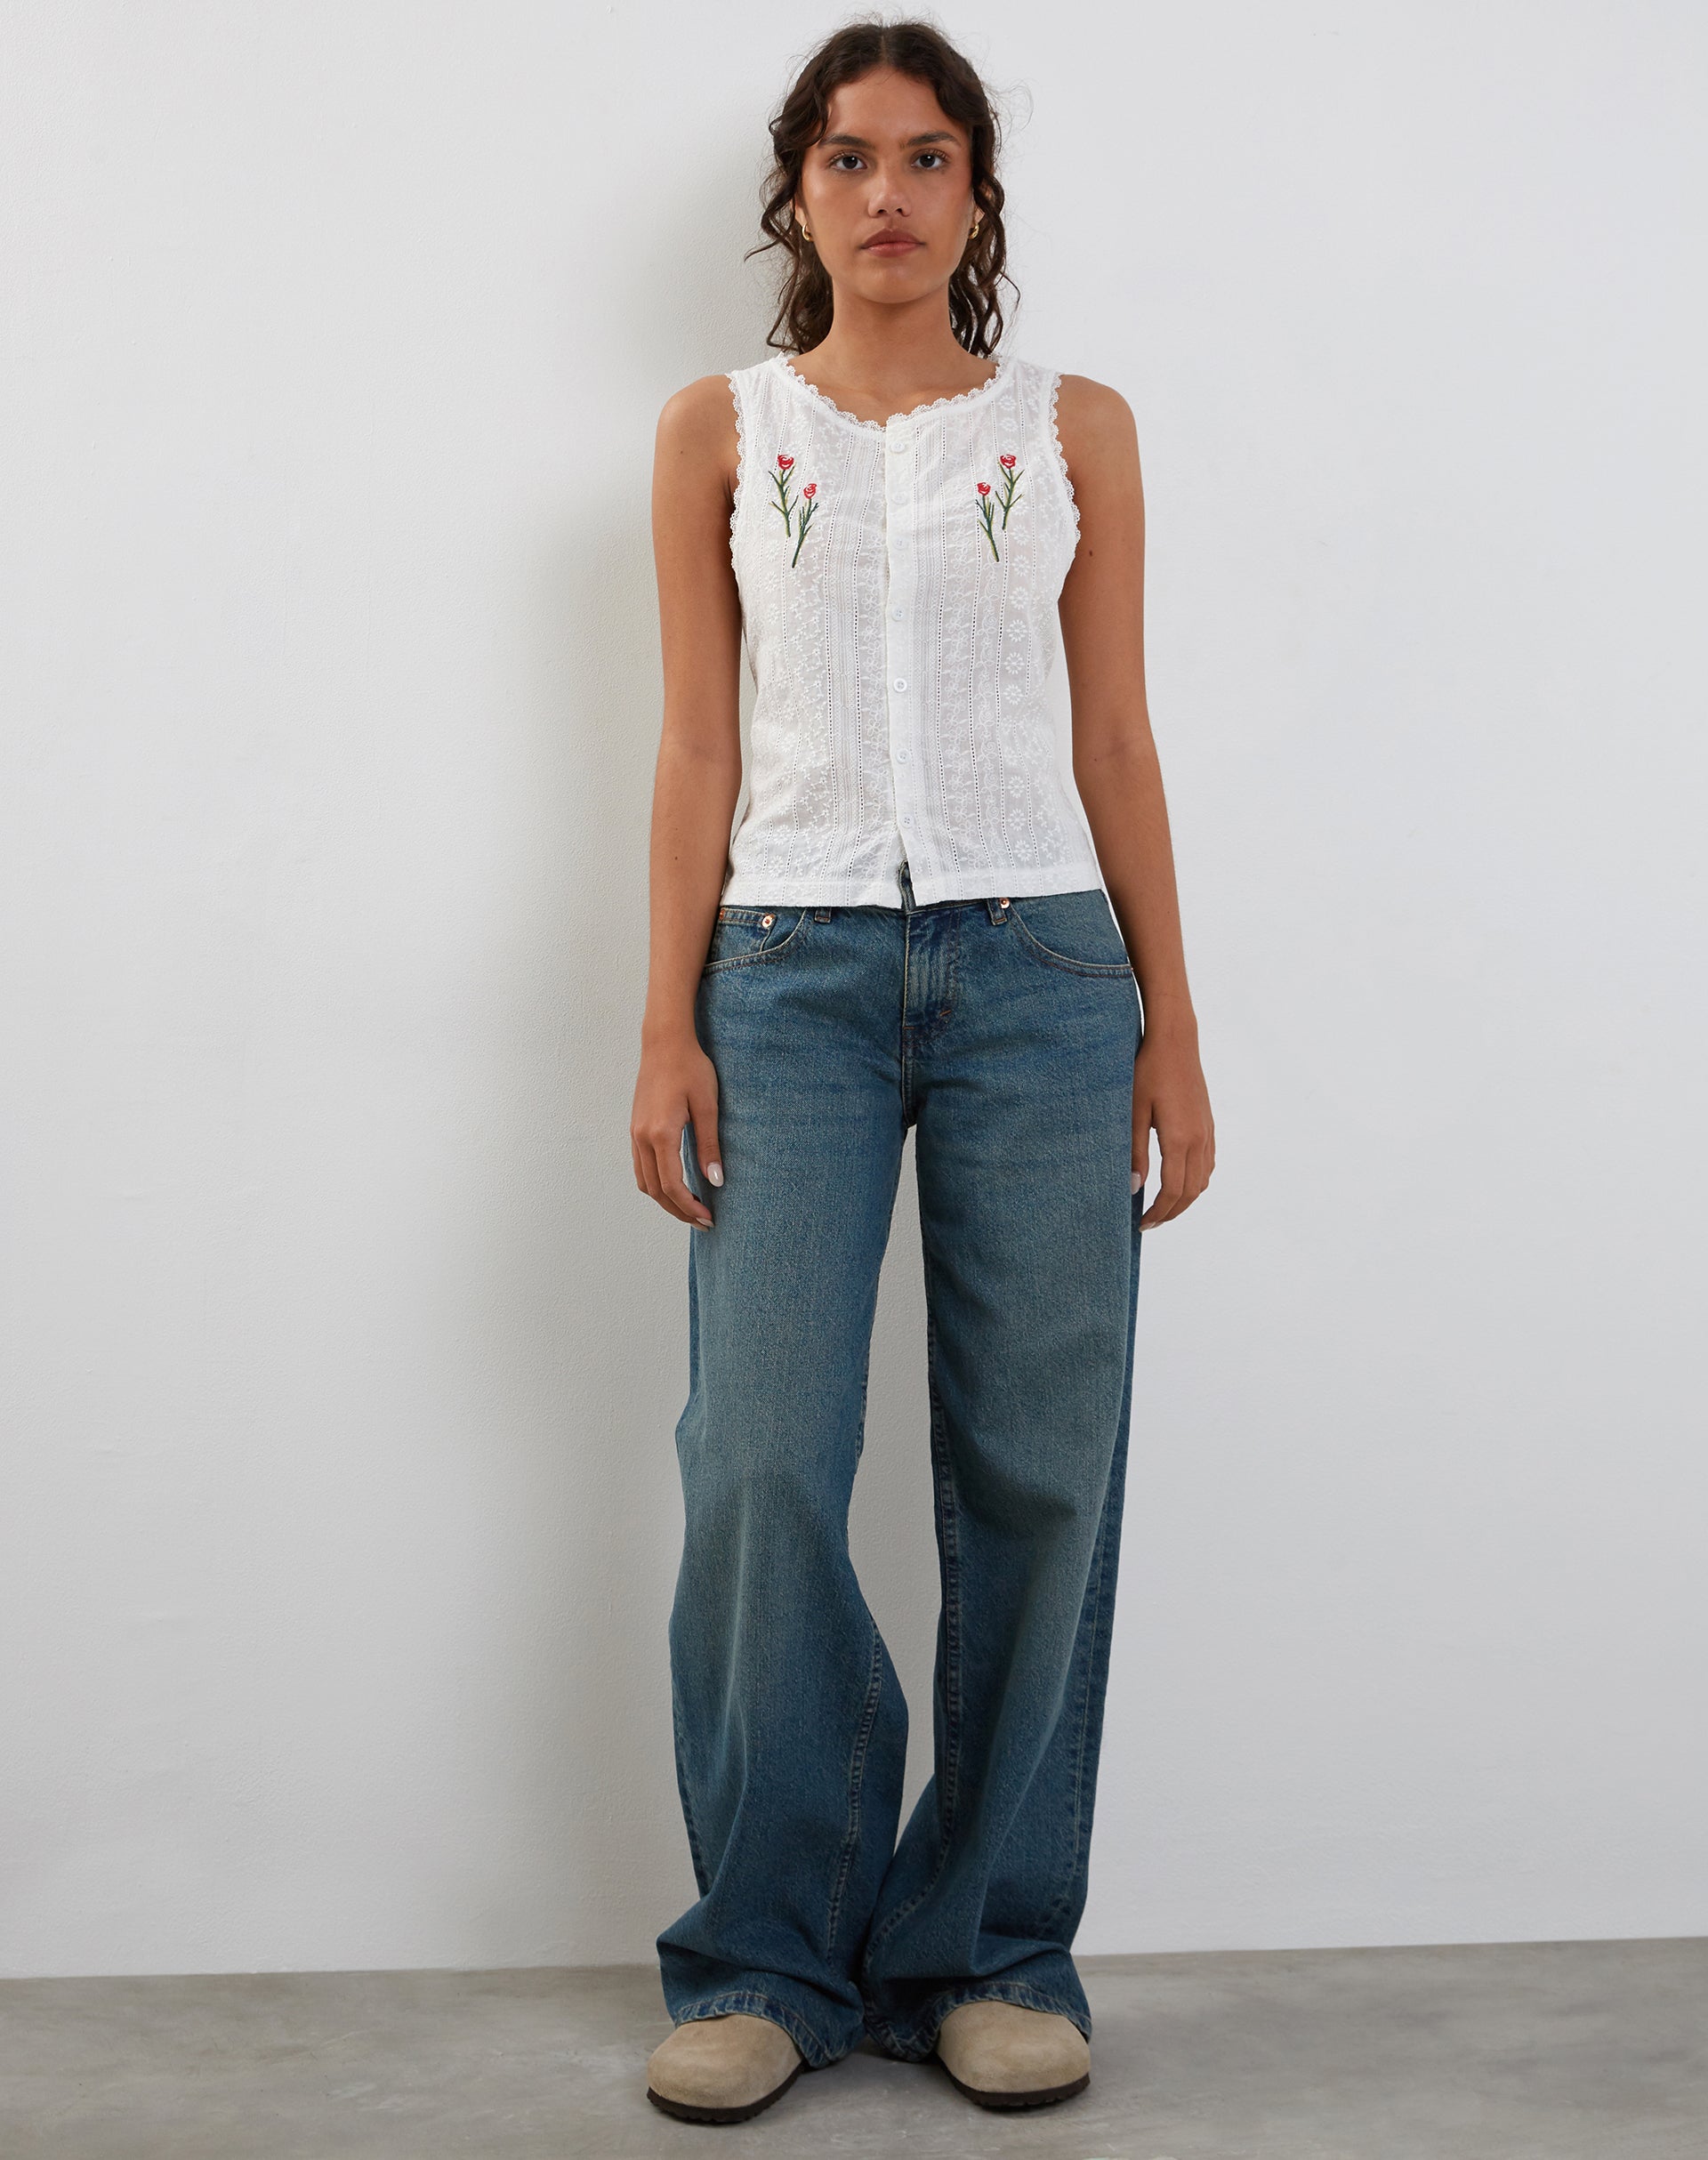 Image of Vezia broderie Sleeveless Top in White with Rose Embroidery